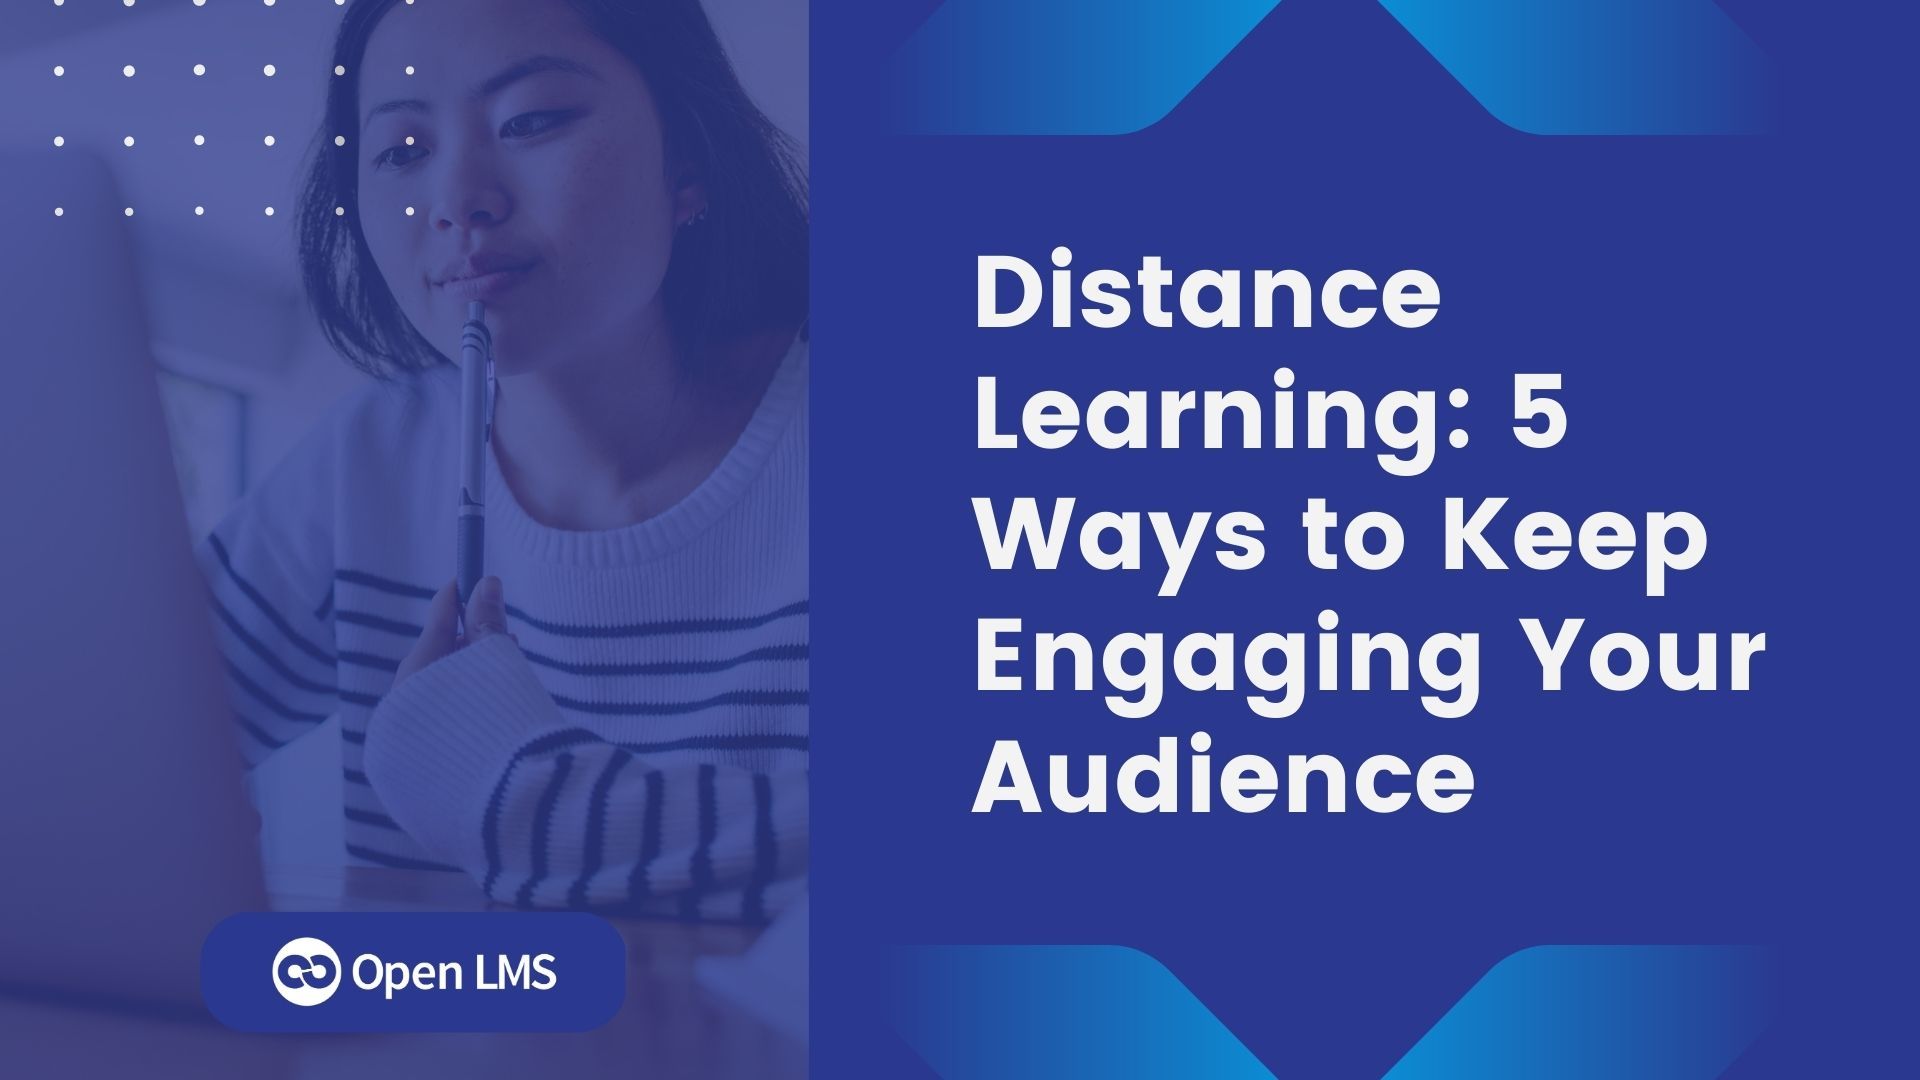 Distance Learning: 5 Ways to Keep Engaging Your Audience